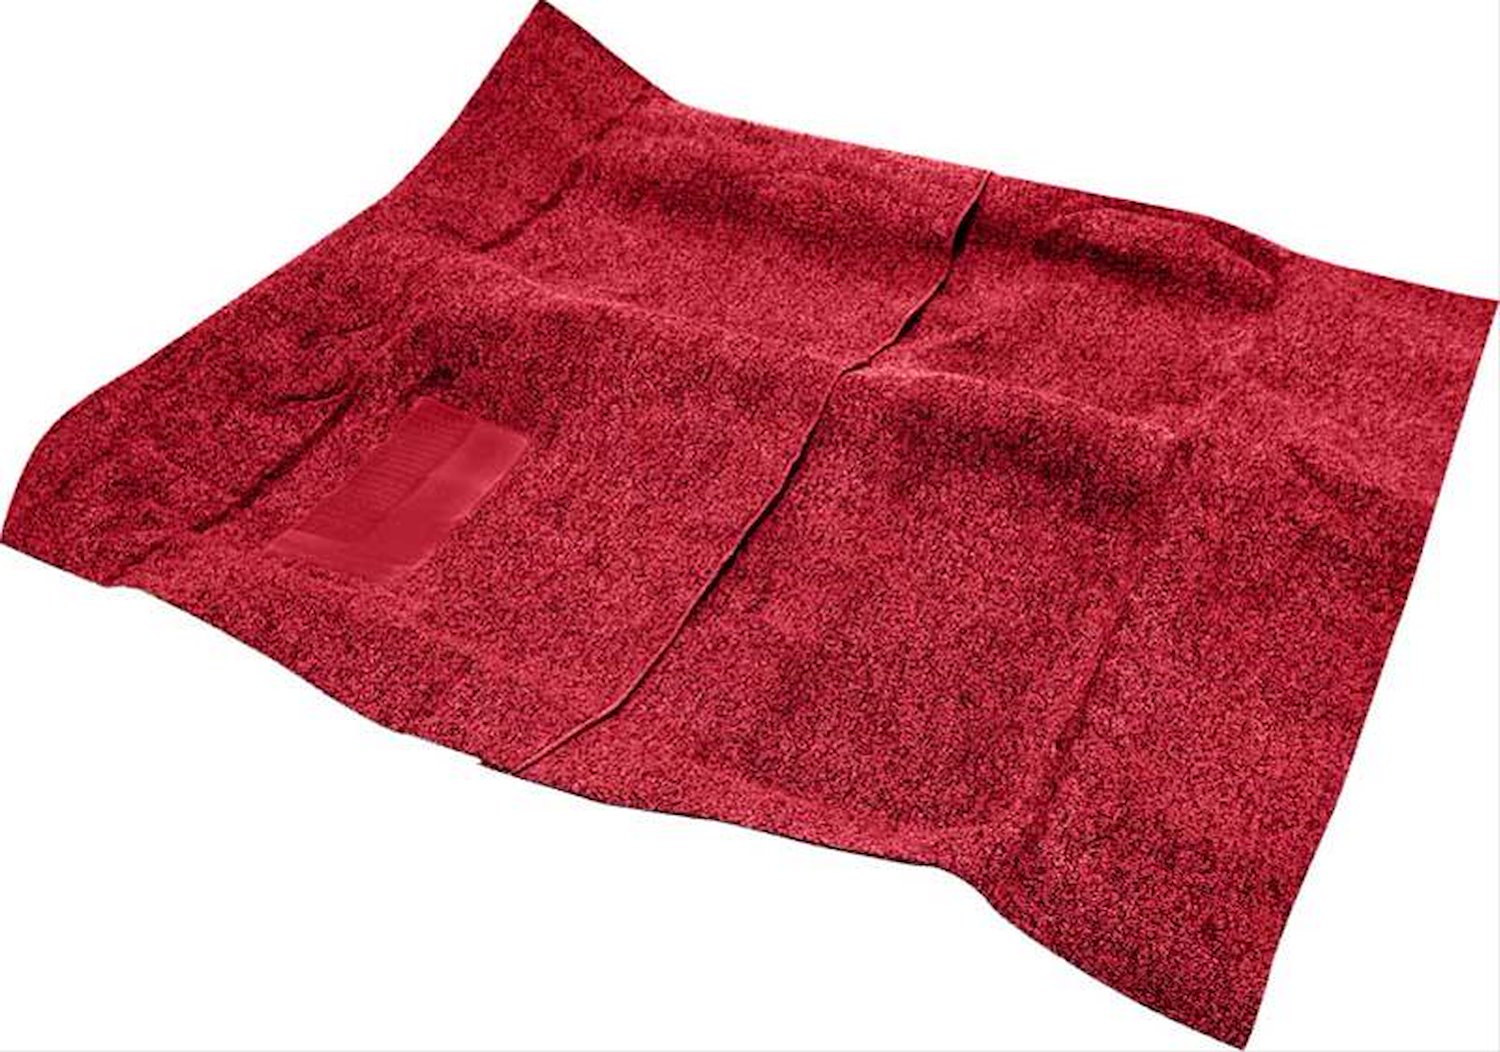 MB9871003 Loop Carpet 1963-64 Plymouth Fury 4-Door With Auto Trans Red Tuxedo